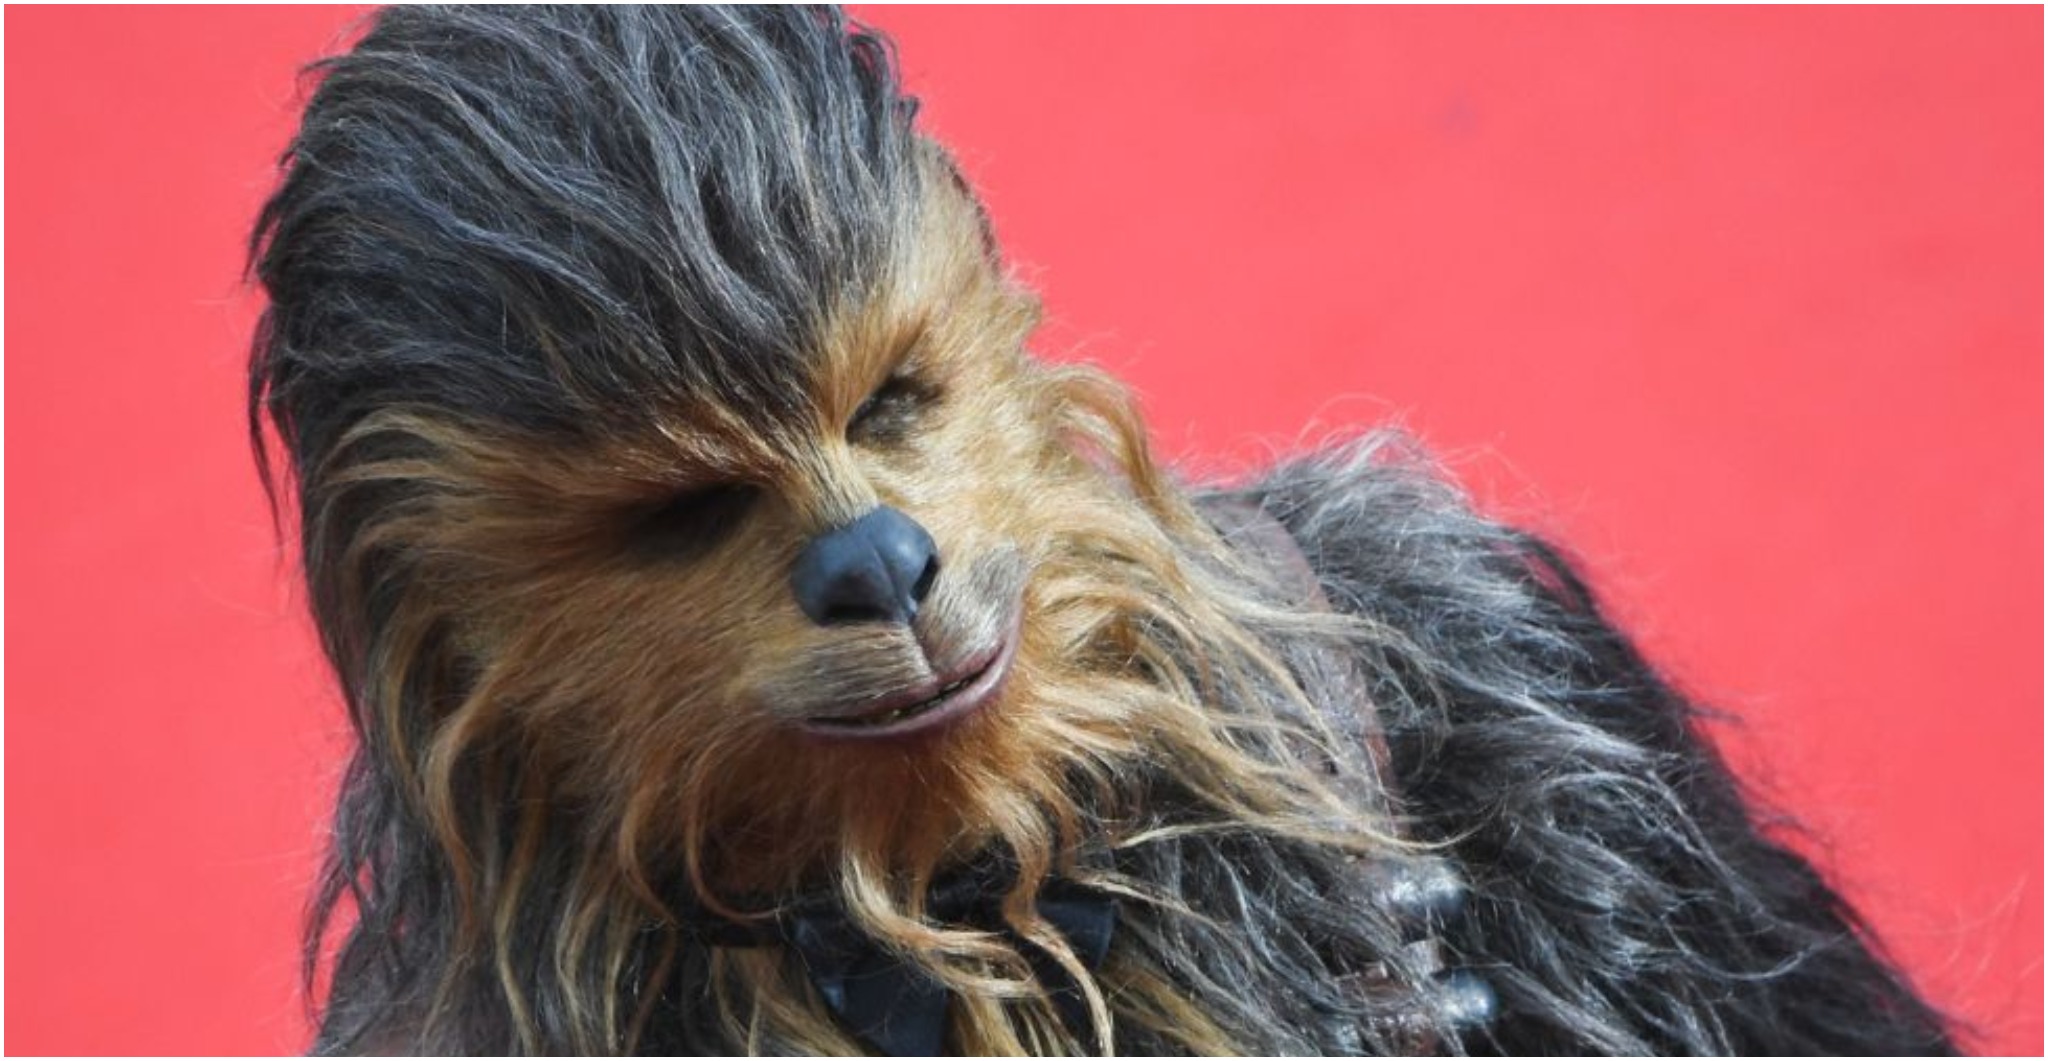 Chewbacca looking smooth. Photo: ANTONIN THUILLIER/AFP via Getty Images